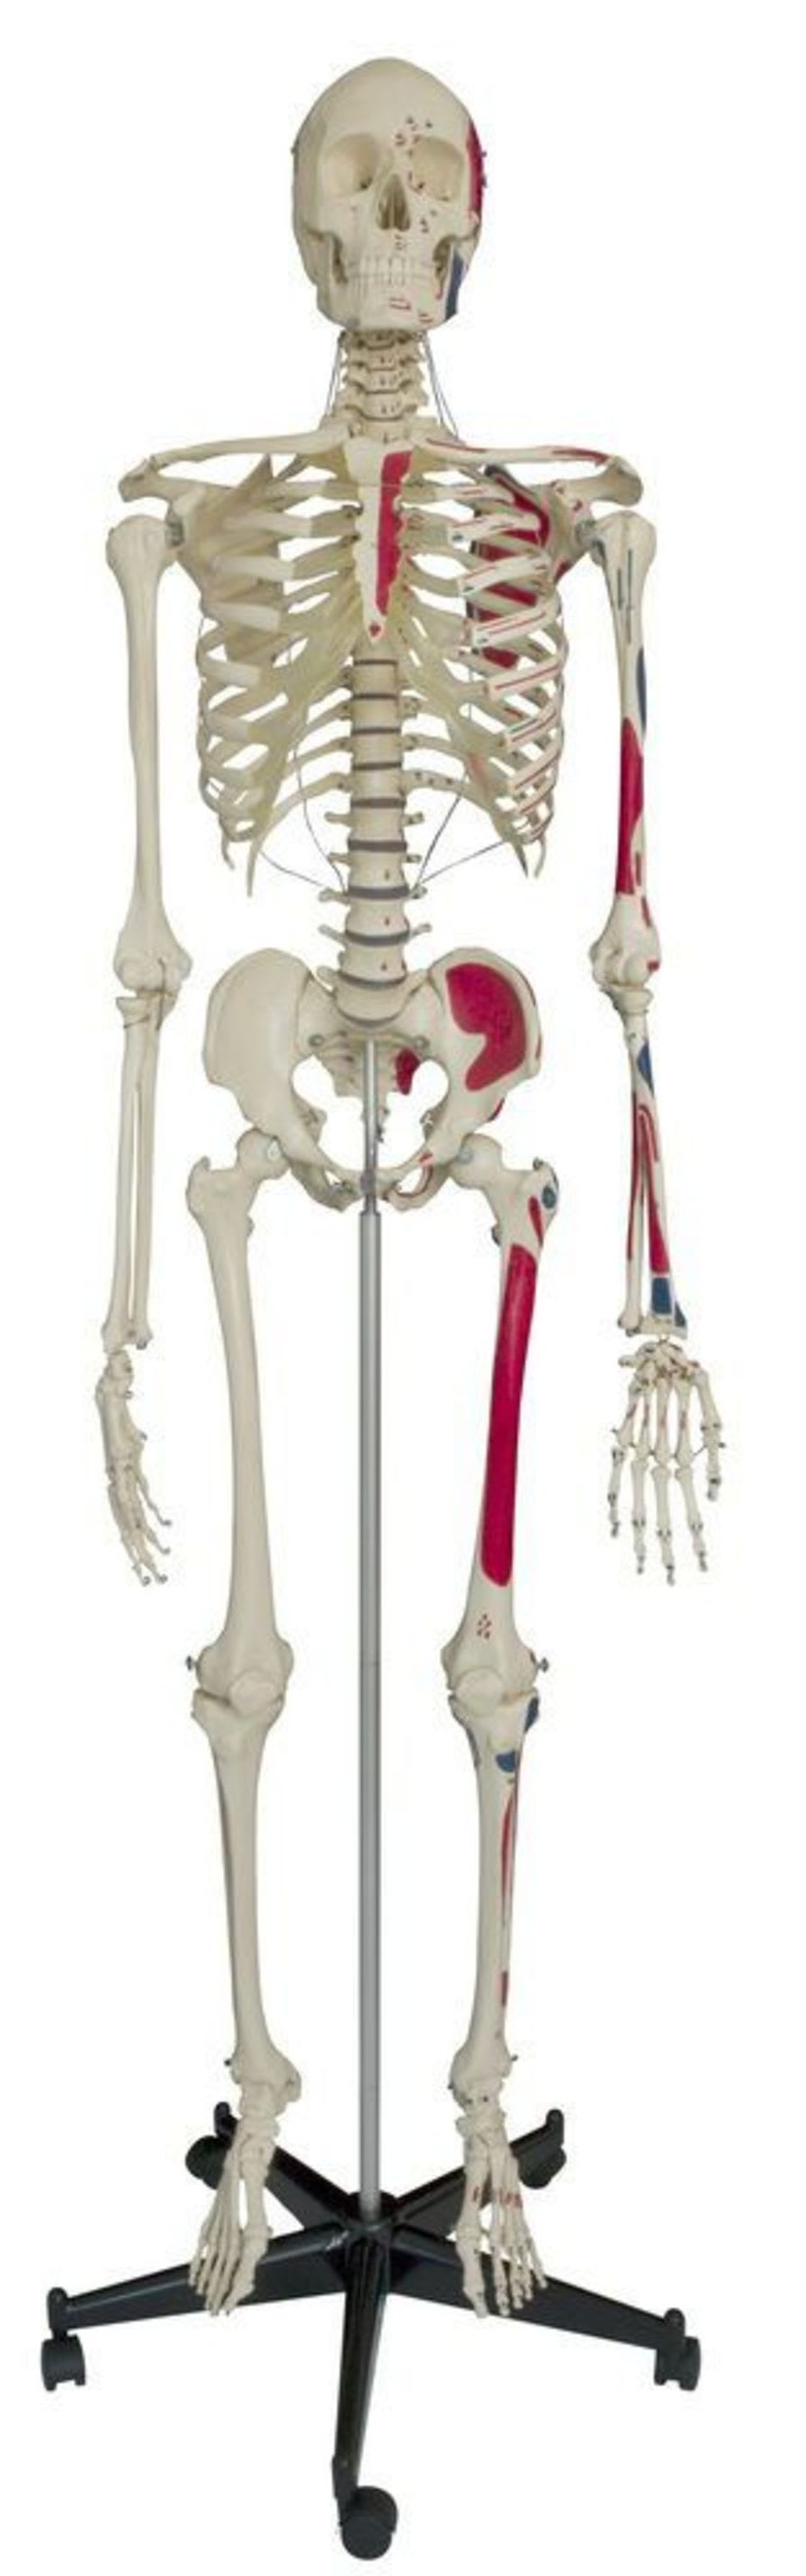 Skeleton anatomical model / with muscle marking A200.1 RÜDIGER - ANATOMIE